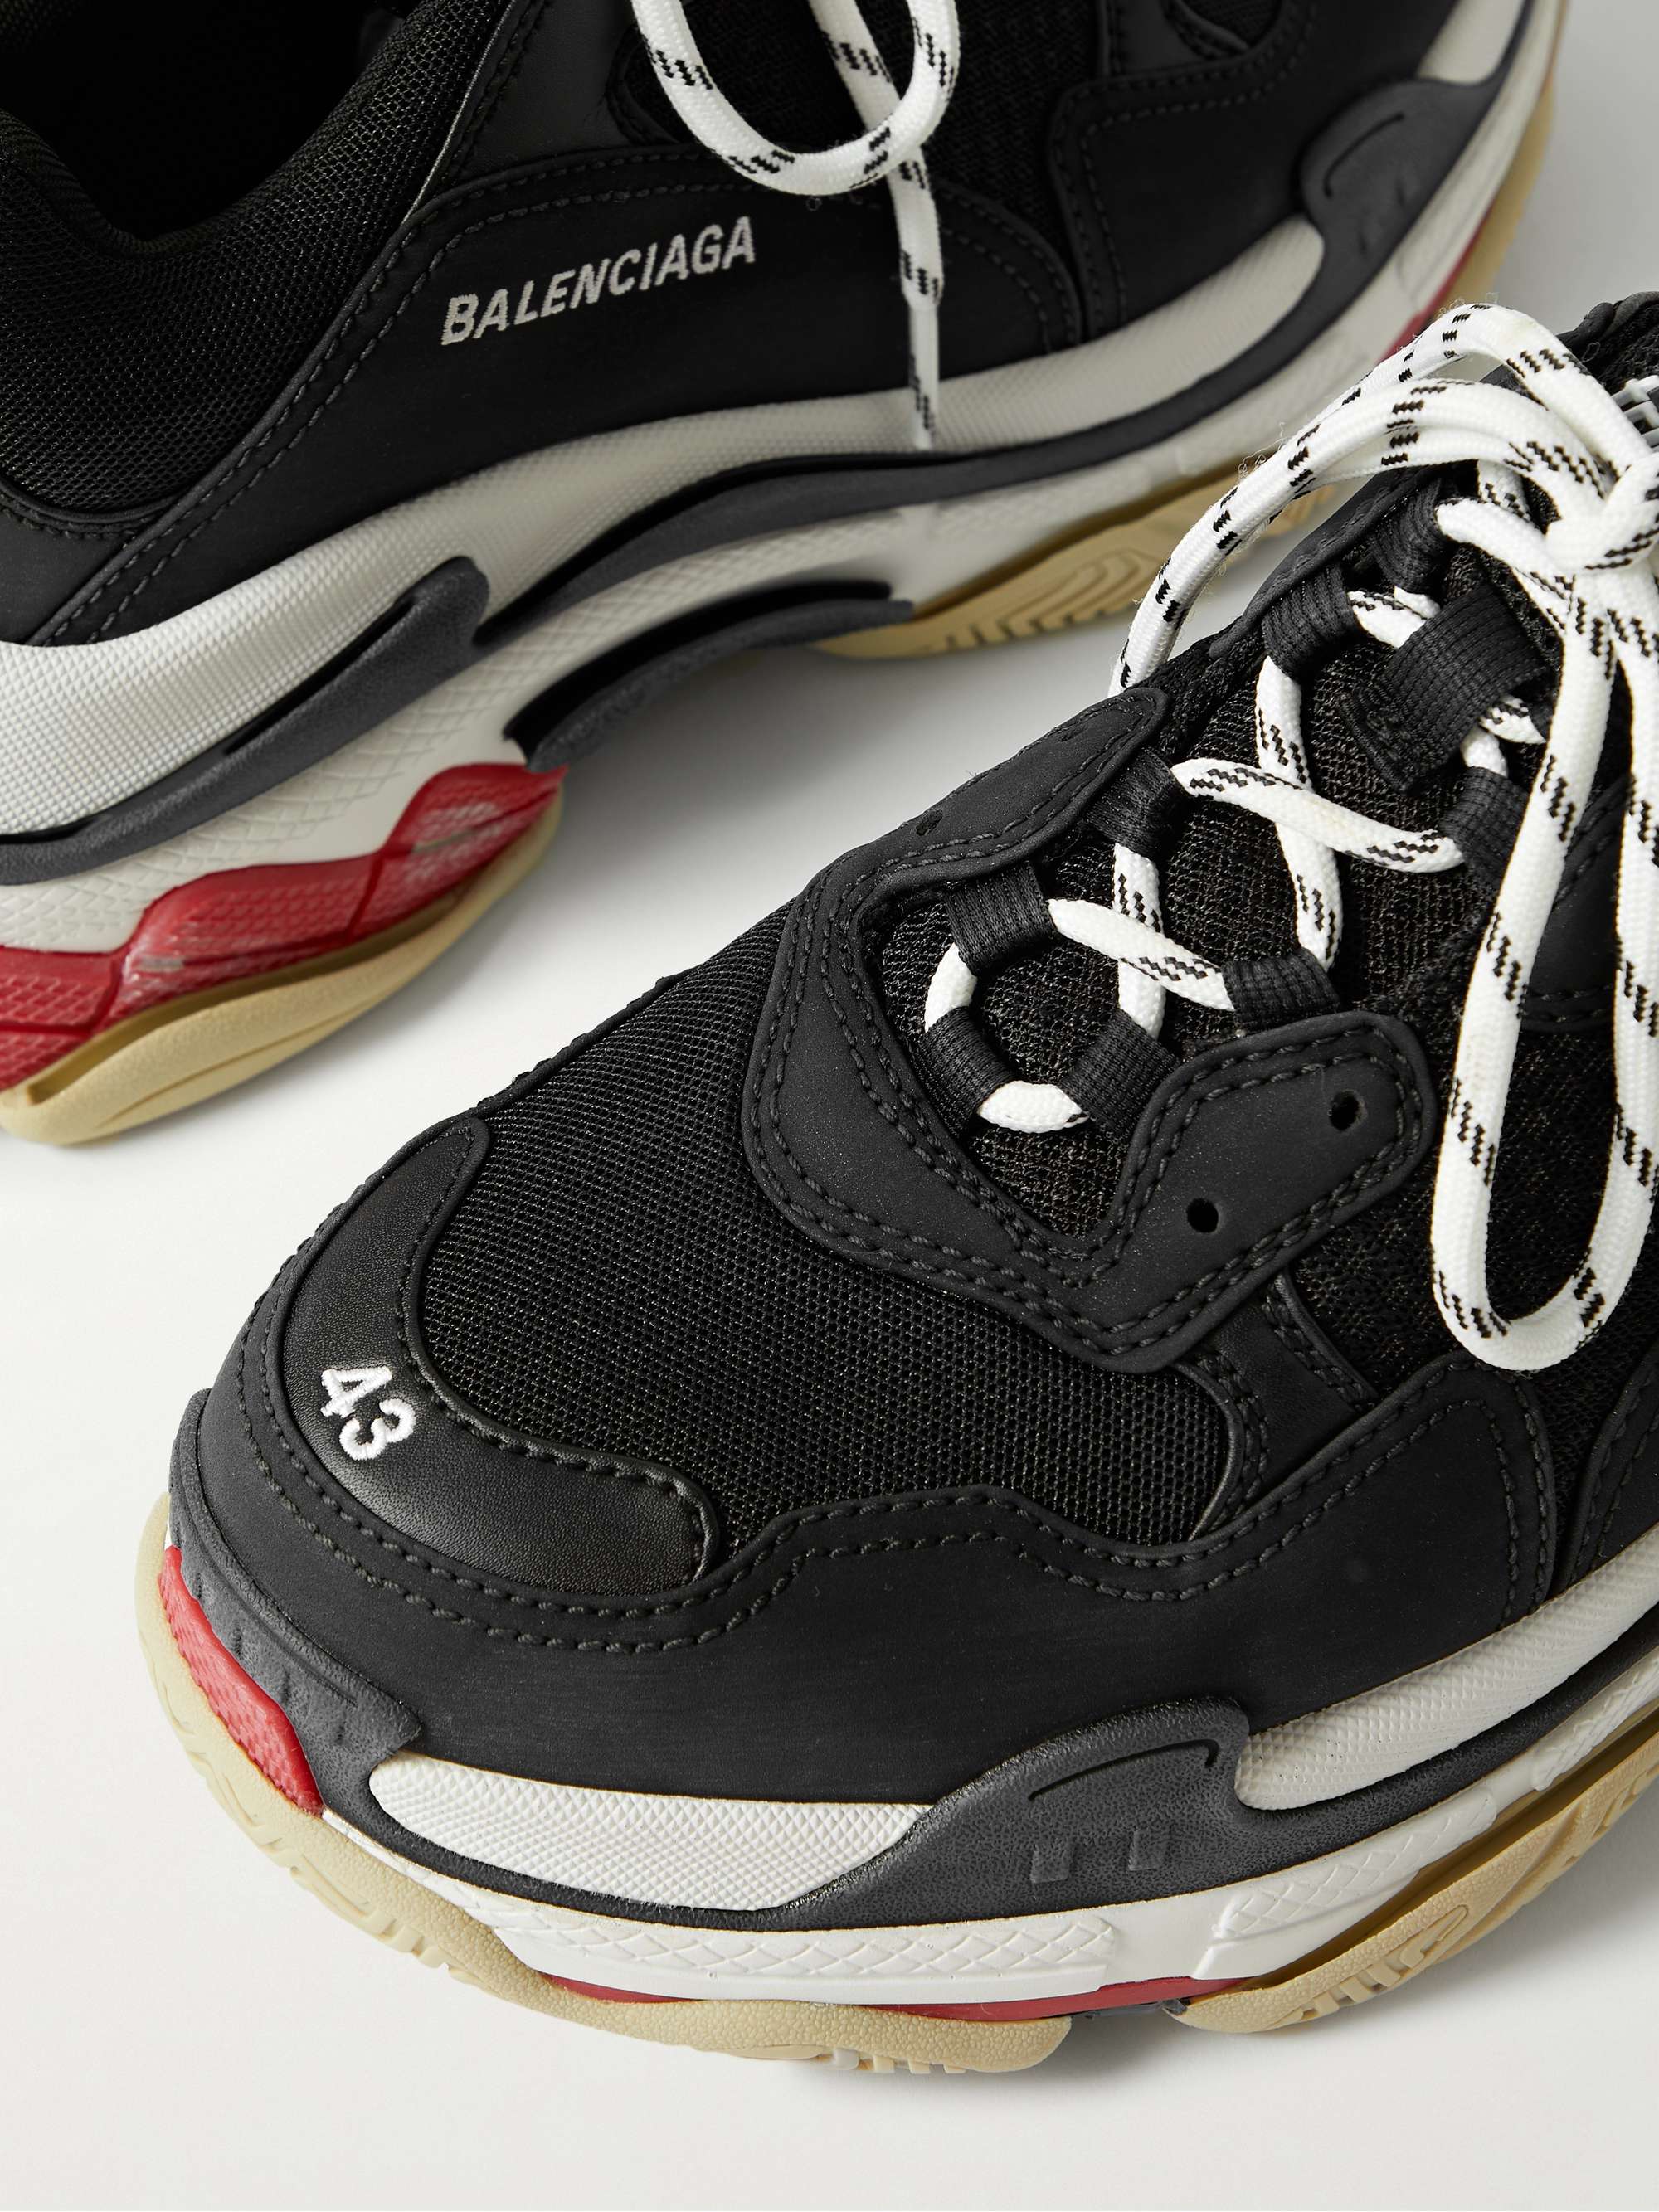 BALENCIAGA Triple S Mesh, Faux Suede and Faux Leather Sneakers